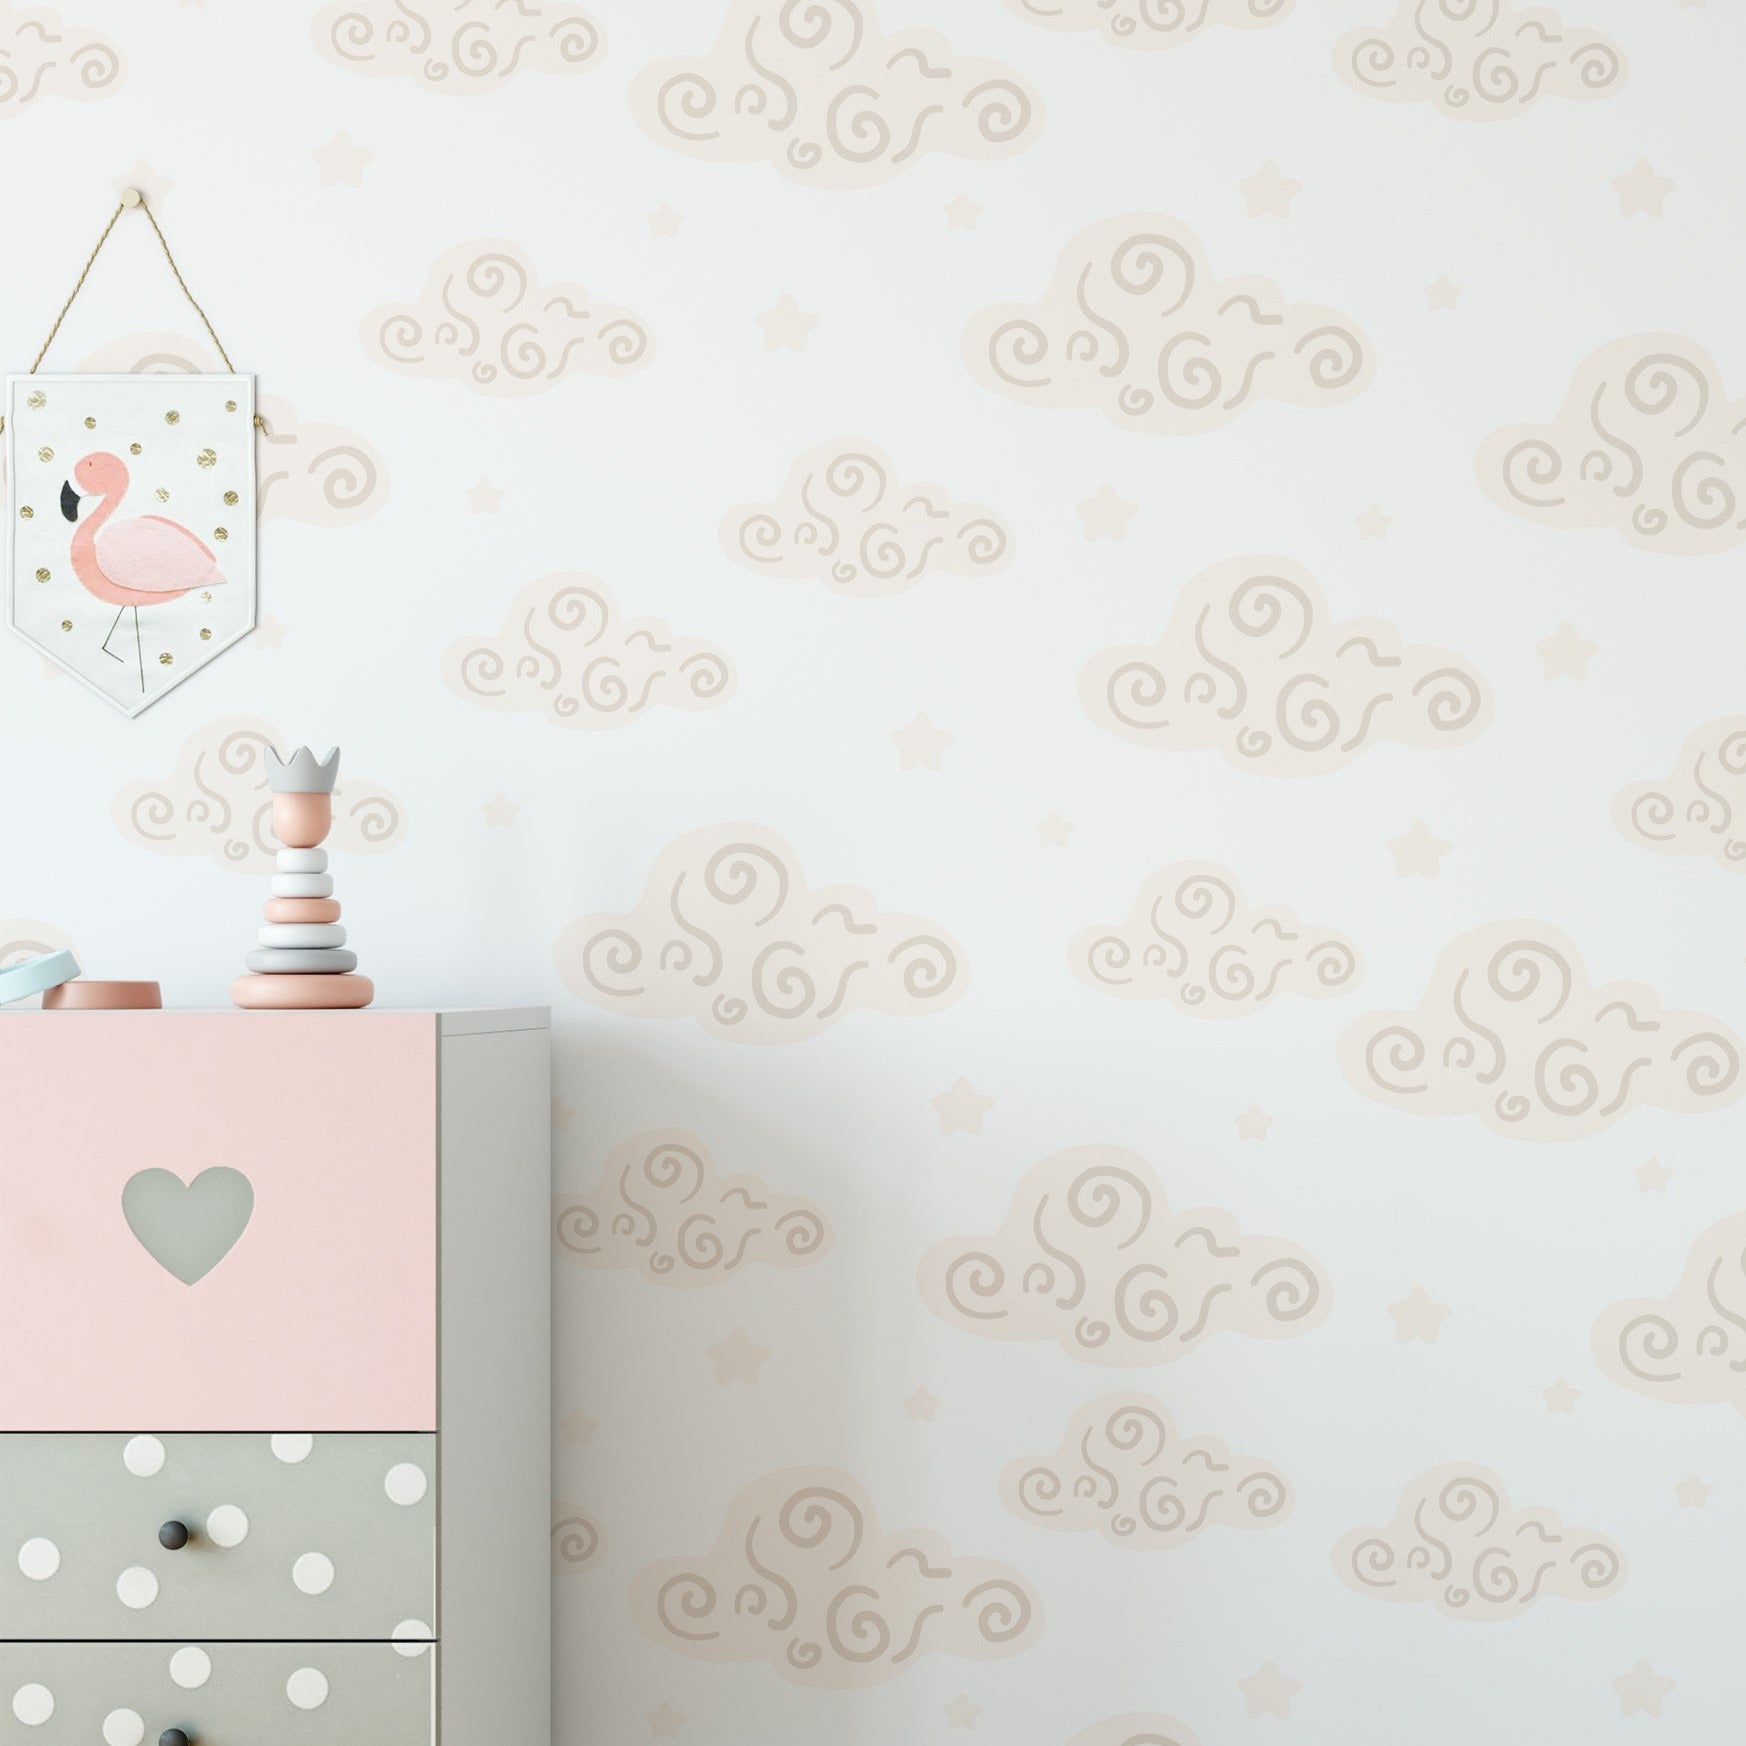 Children's room decorated with Miss Cloud Wallpaper showing cloud and star motifs